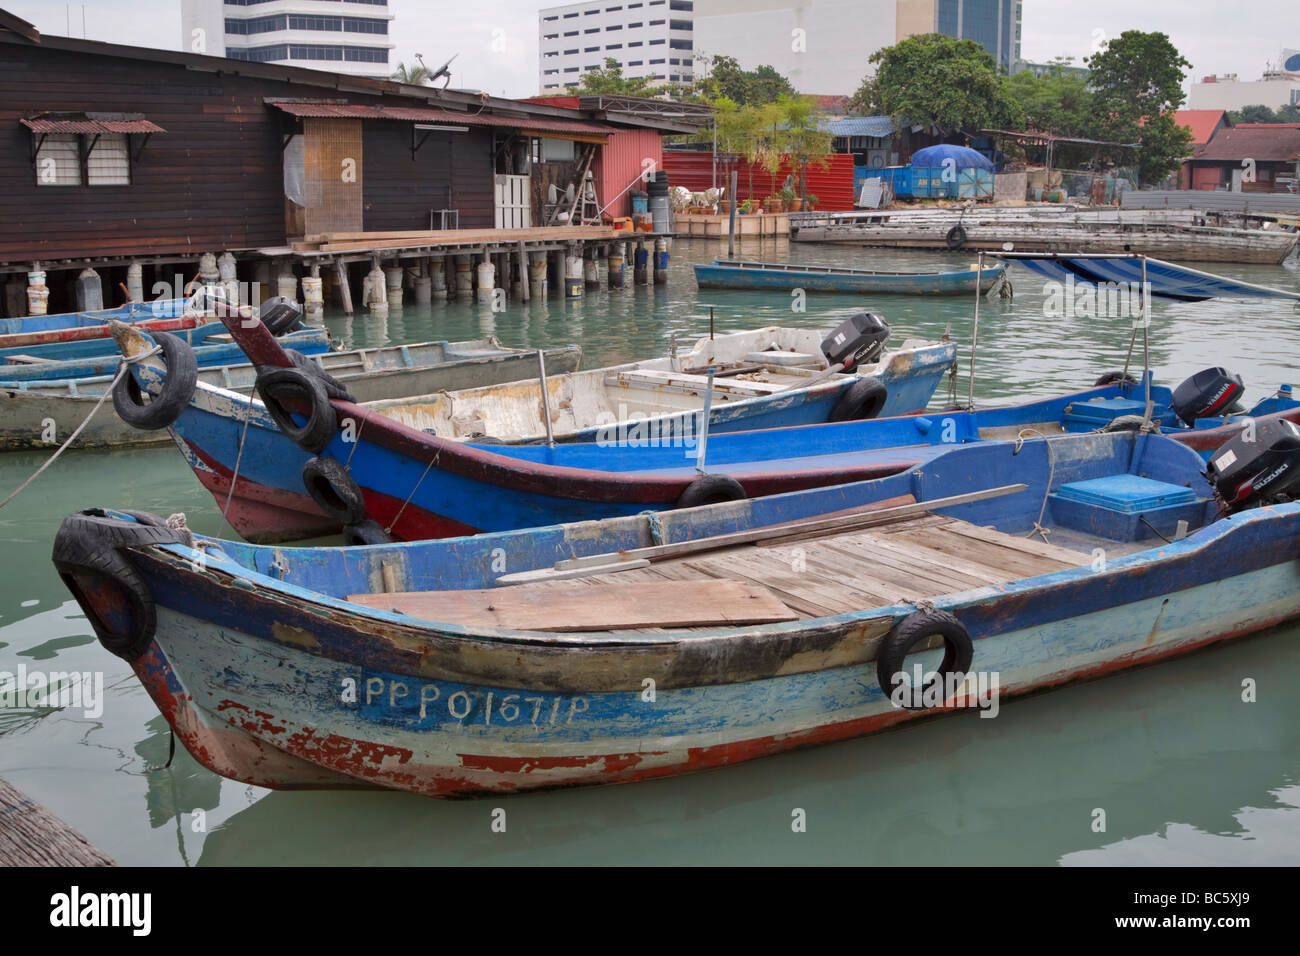 Angelboote/Fischerboote am Chew Jetty, Georgetown, Penang, Malaysia Stockfoto